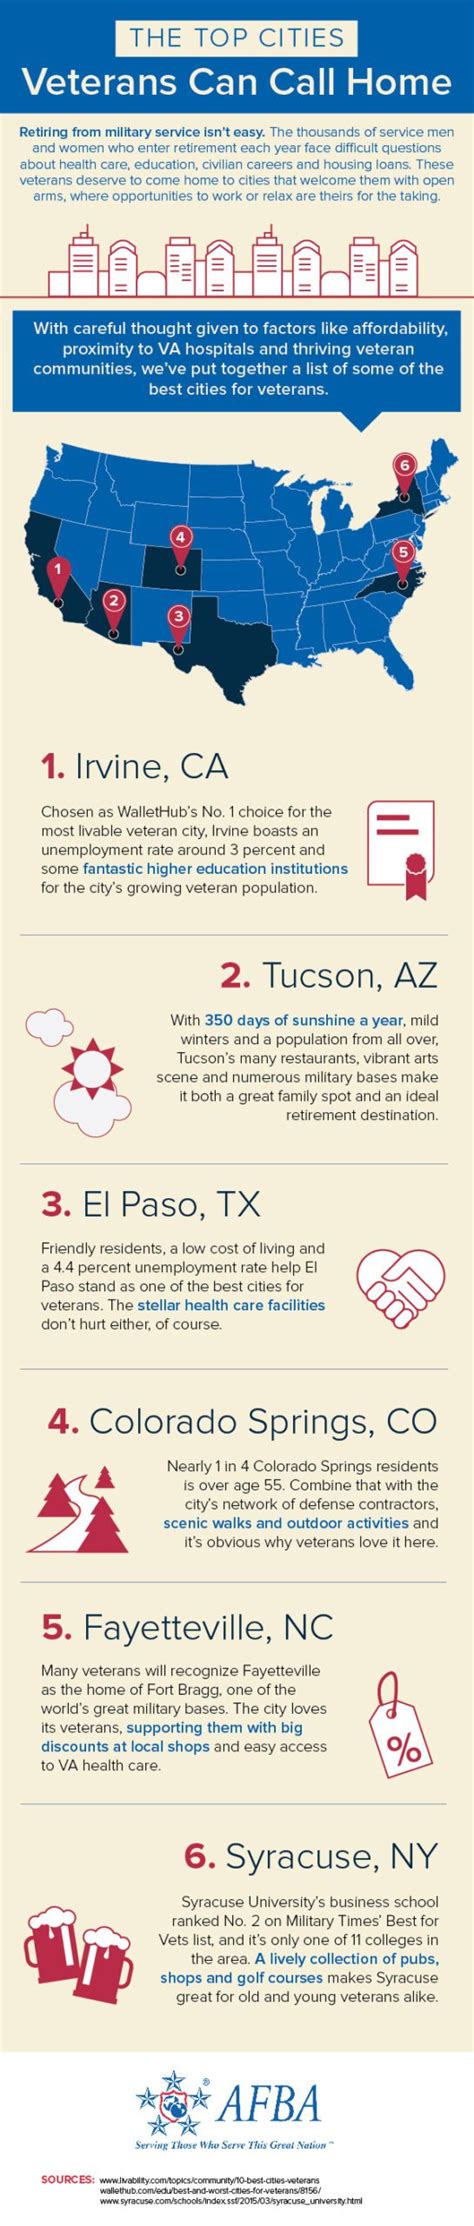 The Best Cities For A Life After Service Infographic